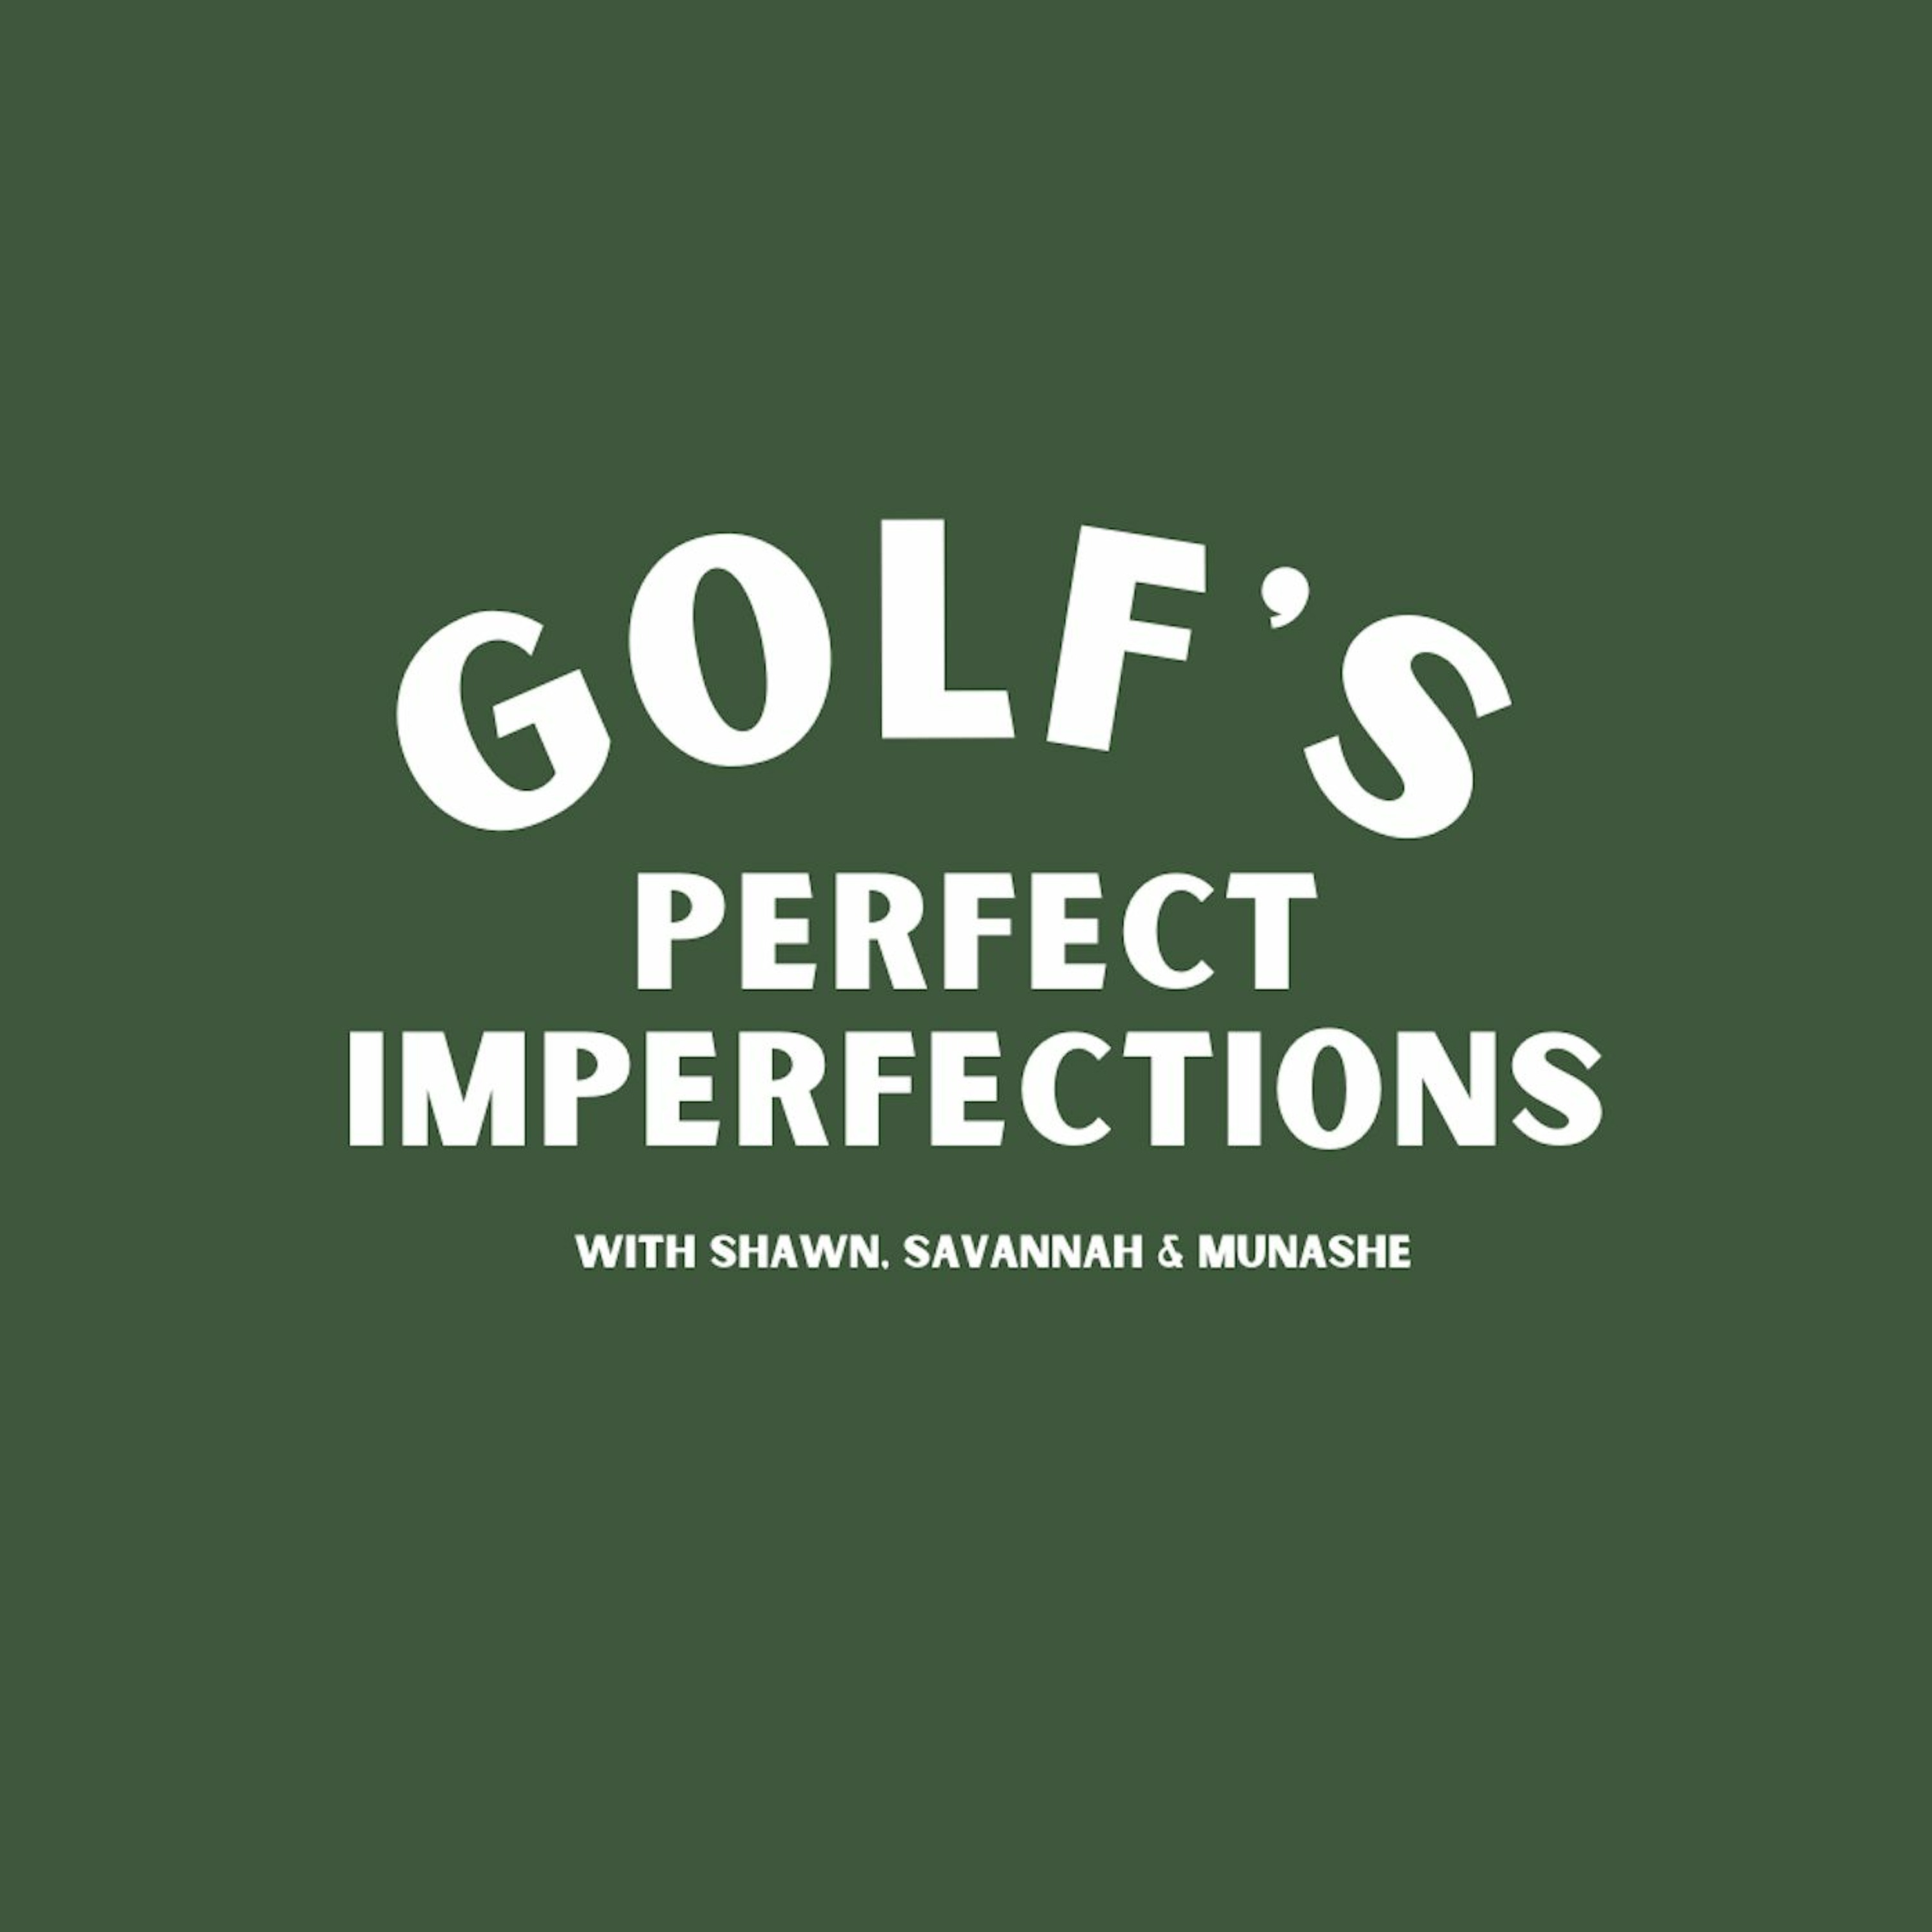 Golf’s Perfect Imperfections: How to Stop Chasing Your Tail with Body Parts.